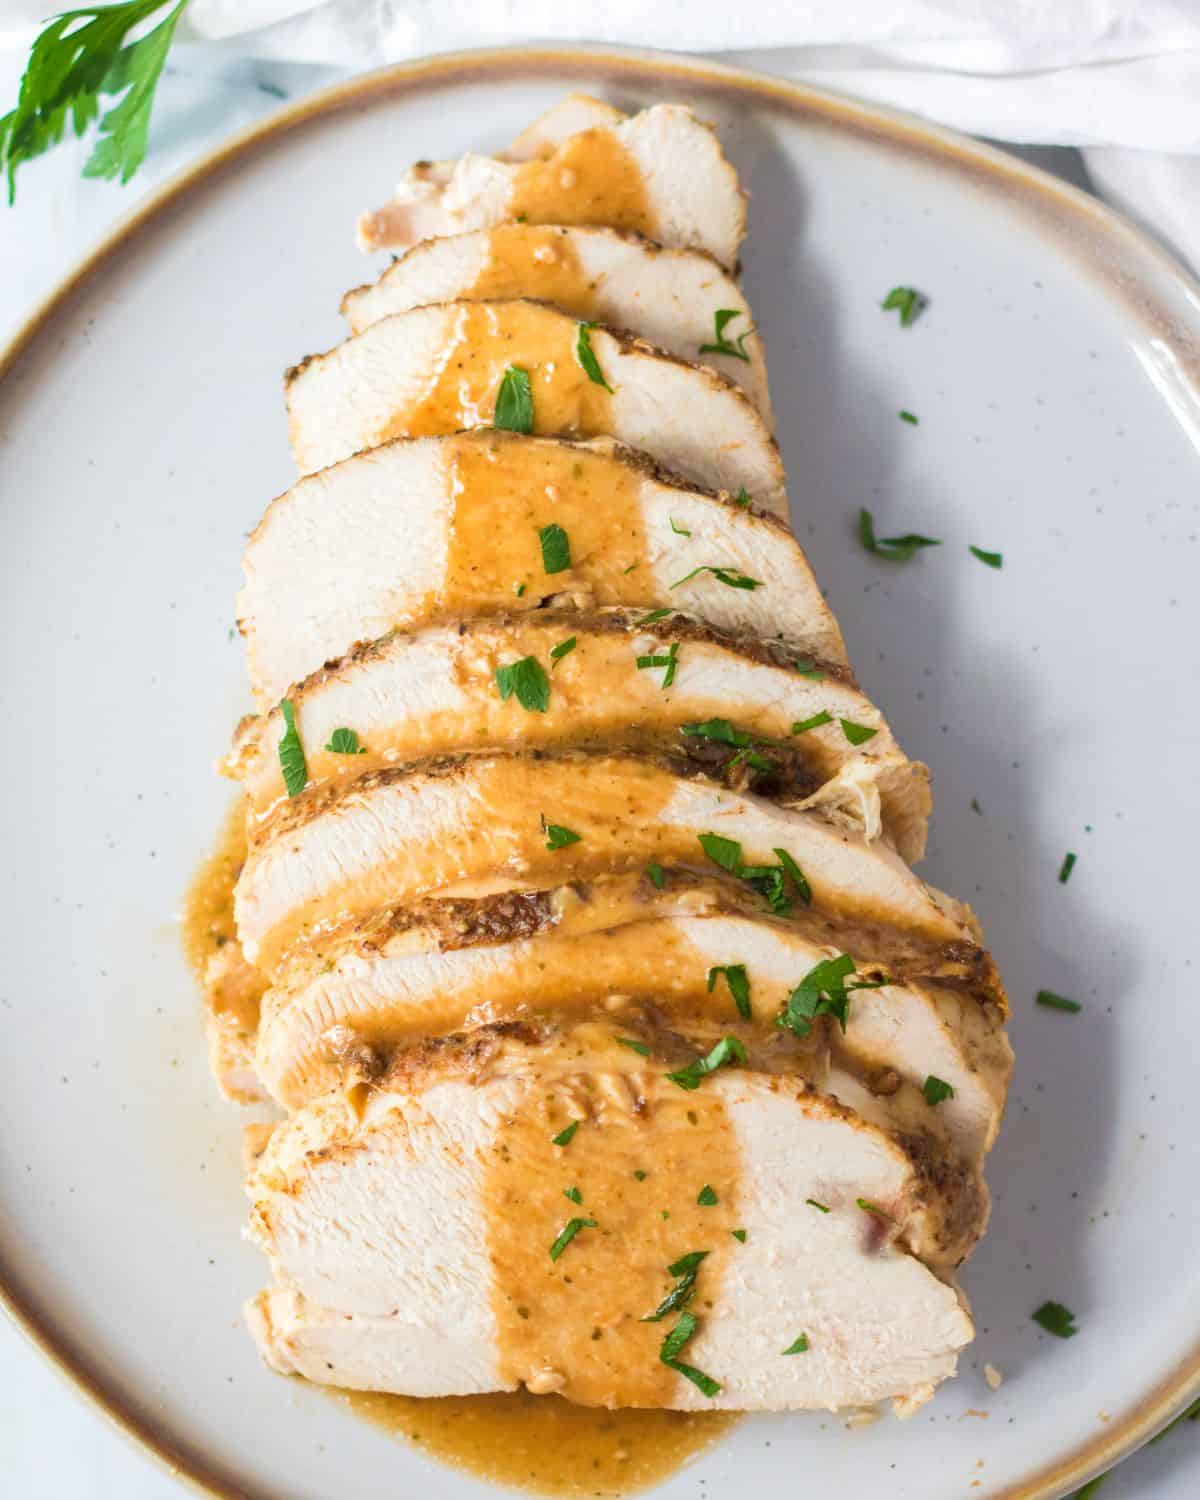 Sliced Turkey meat on a platter drizzled with gravy and chopped parsley.